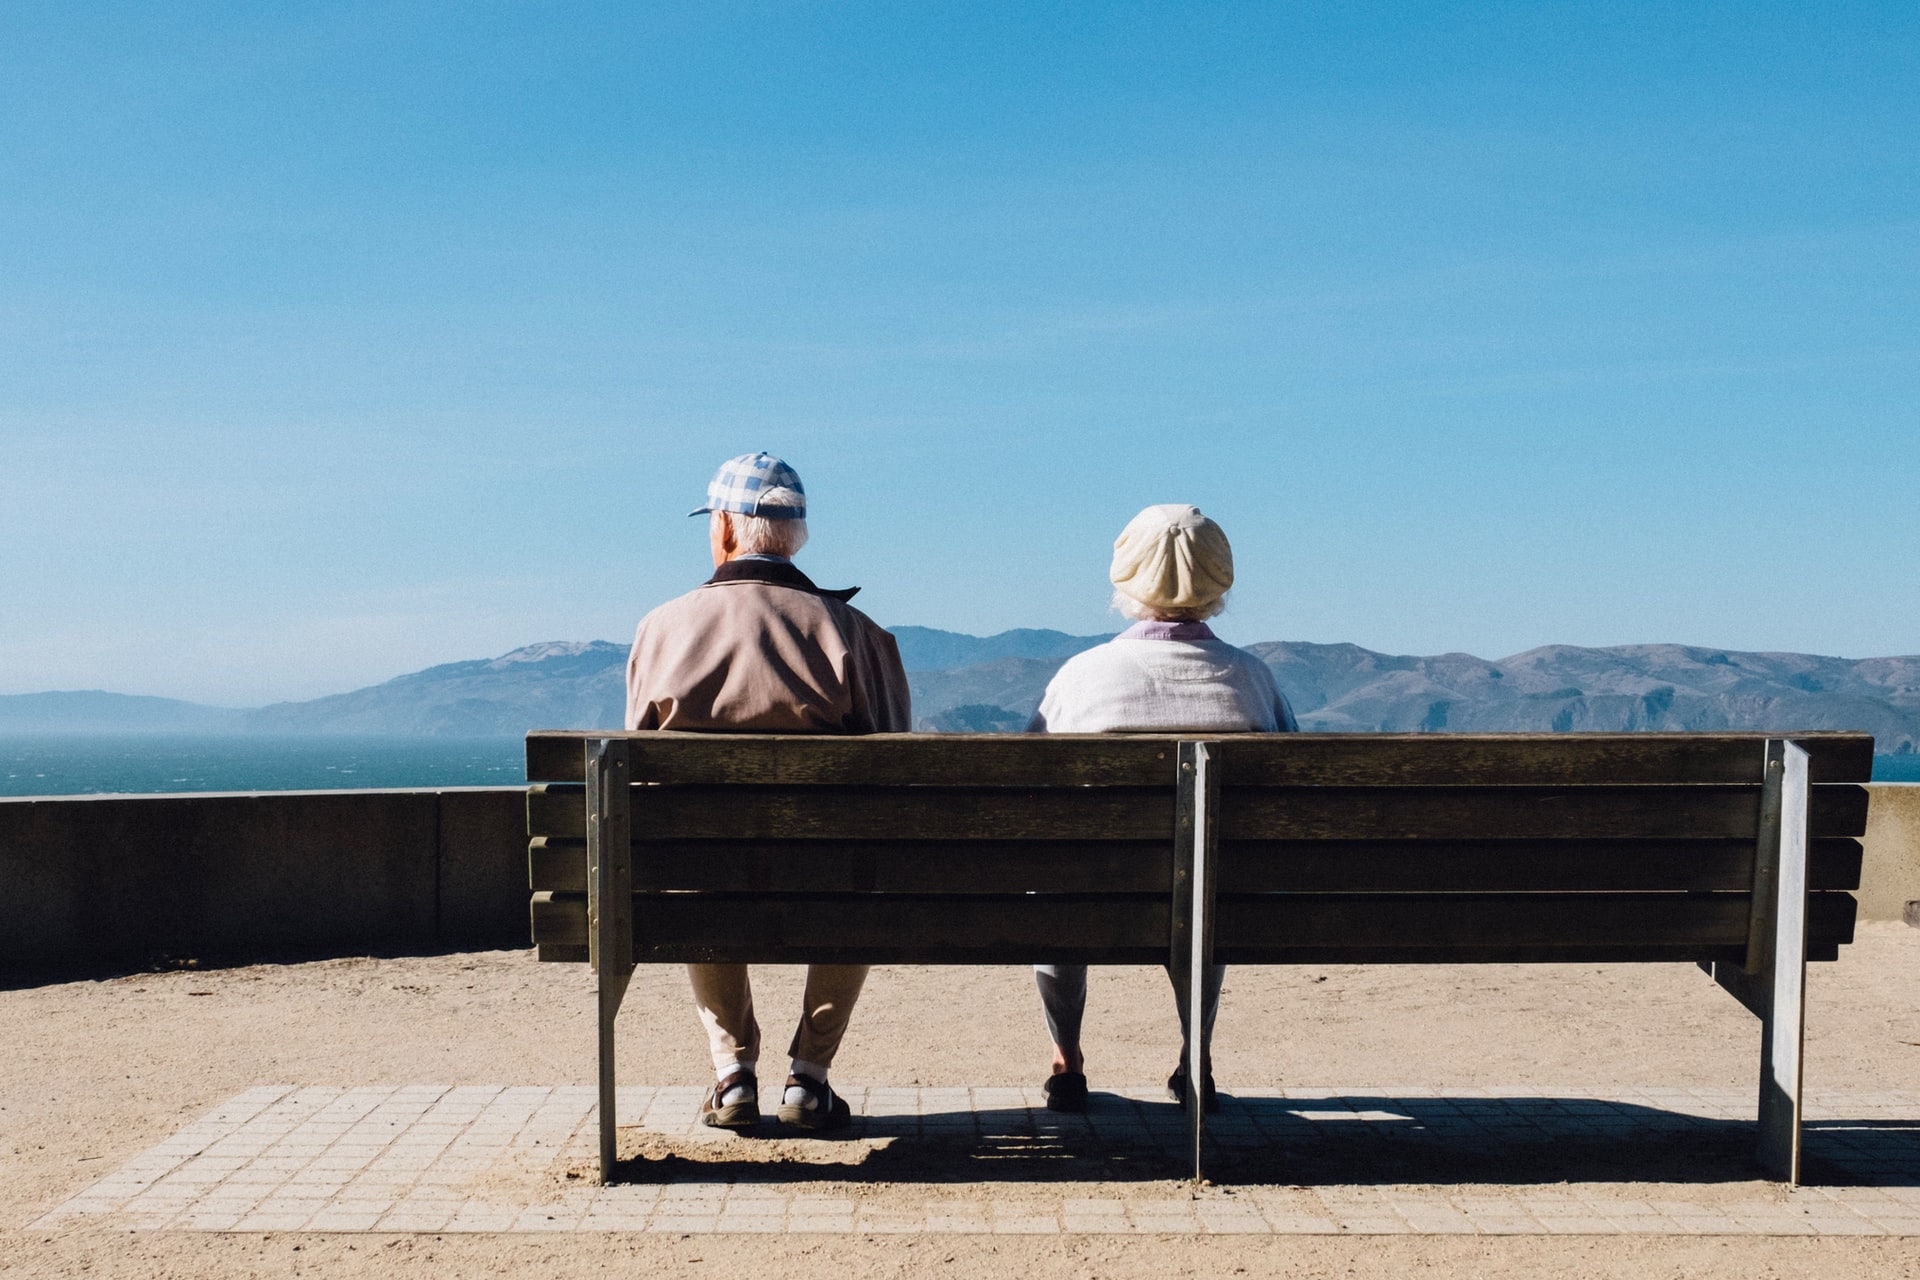 Two older people on a bench looking out into the distance over water and mountains